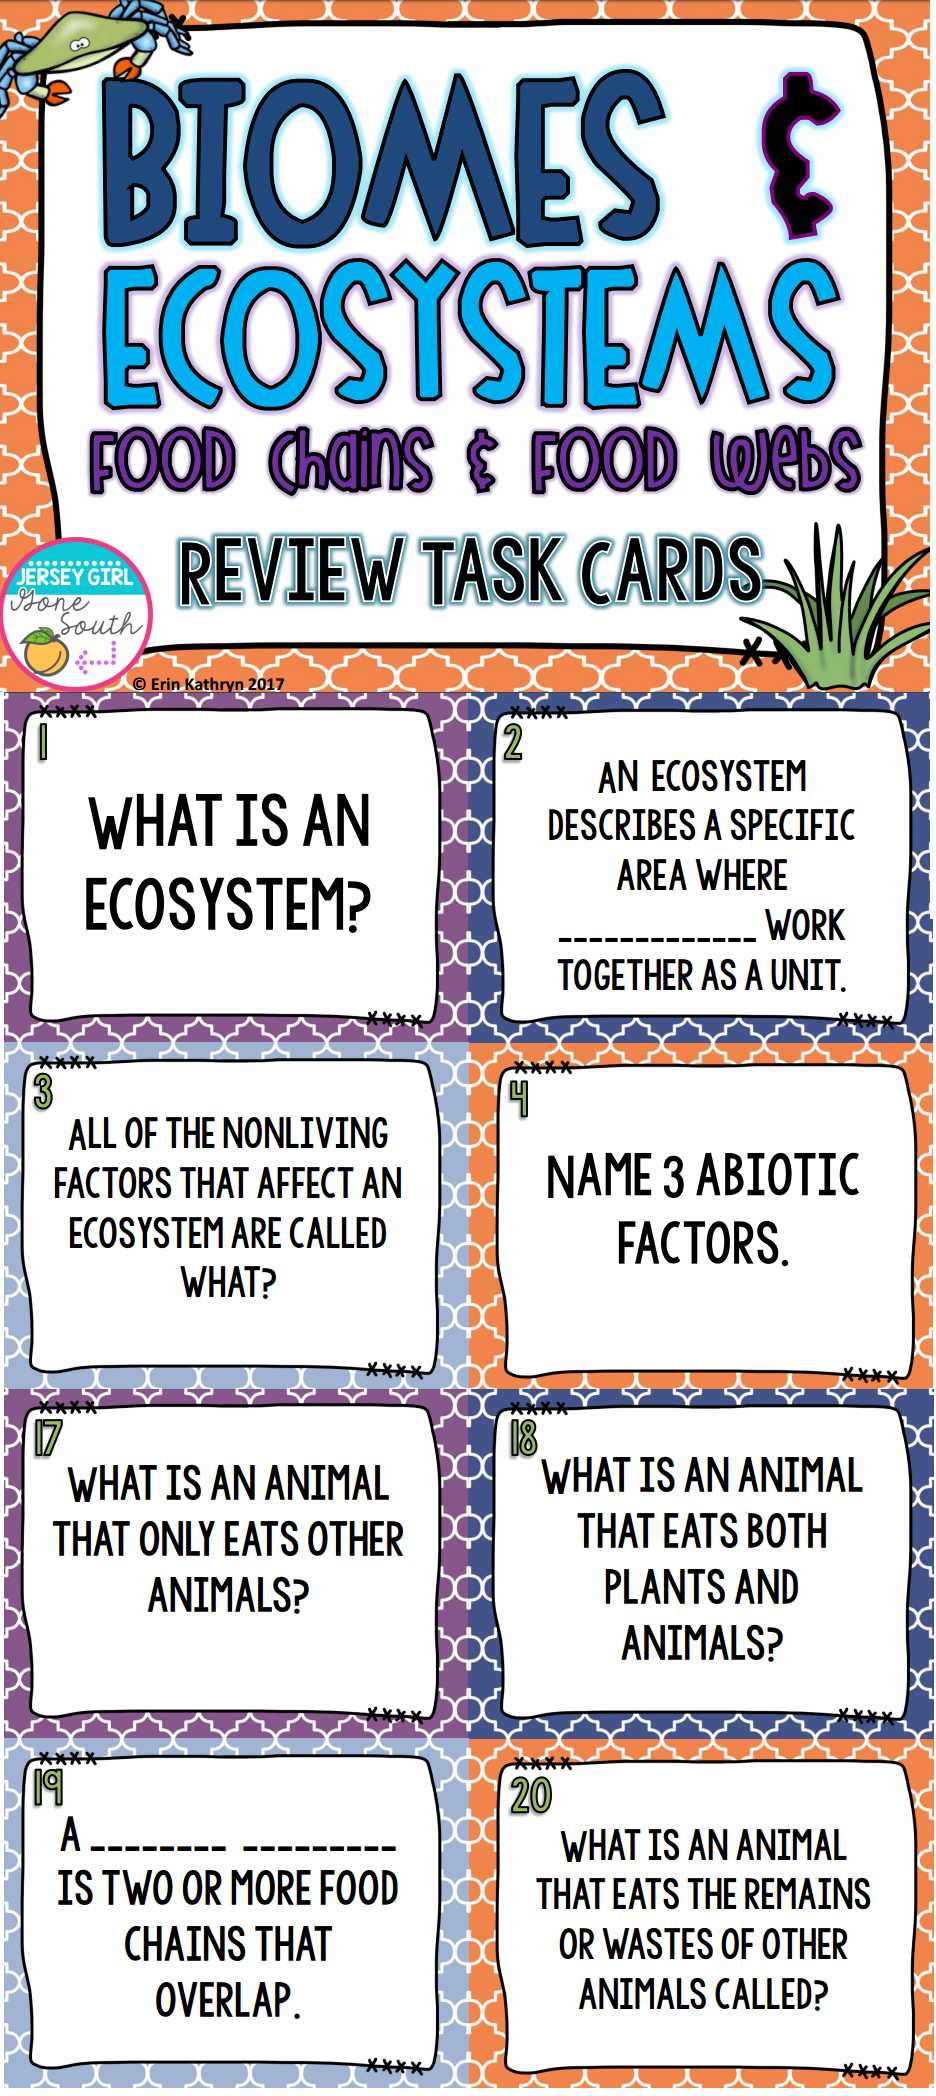 Food Web Worksheet Answers Along with Ecosystems Biomes Food Chains and Food Webs Review Task Cards Set